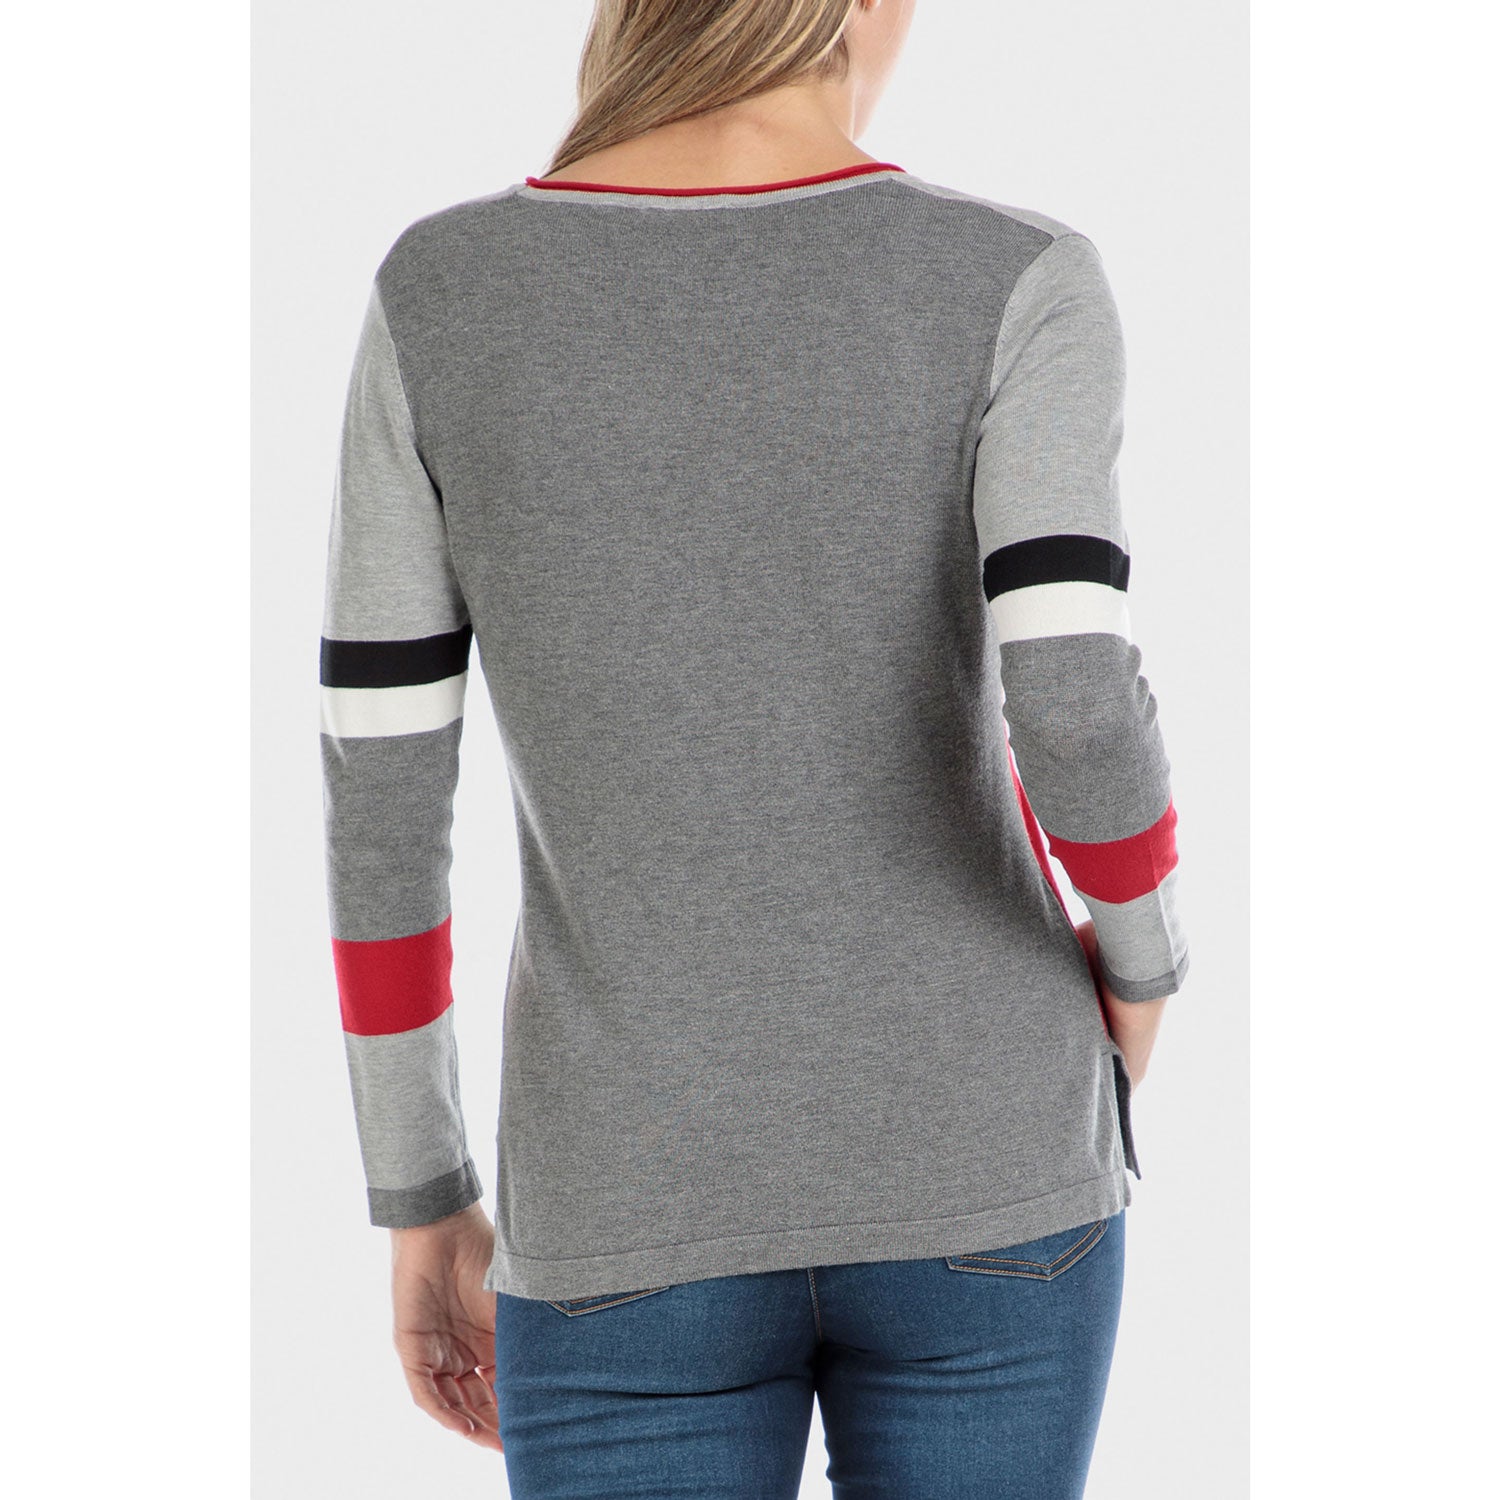 Punt Roma Intarsia Sweater - Grey/Red 2 Shaws Department Stores